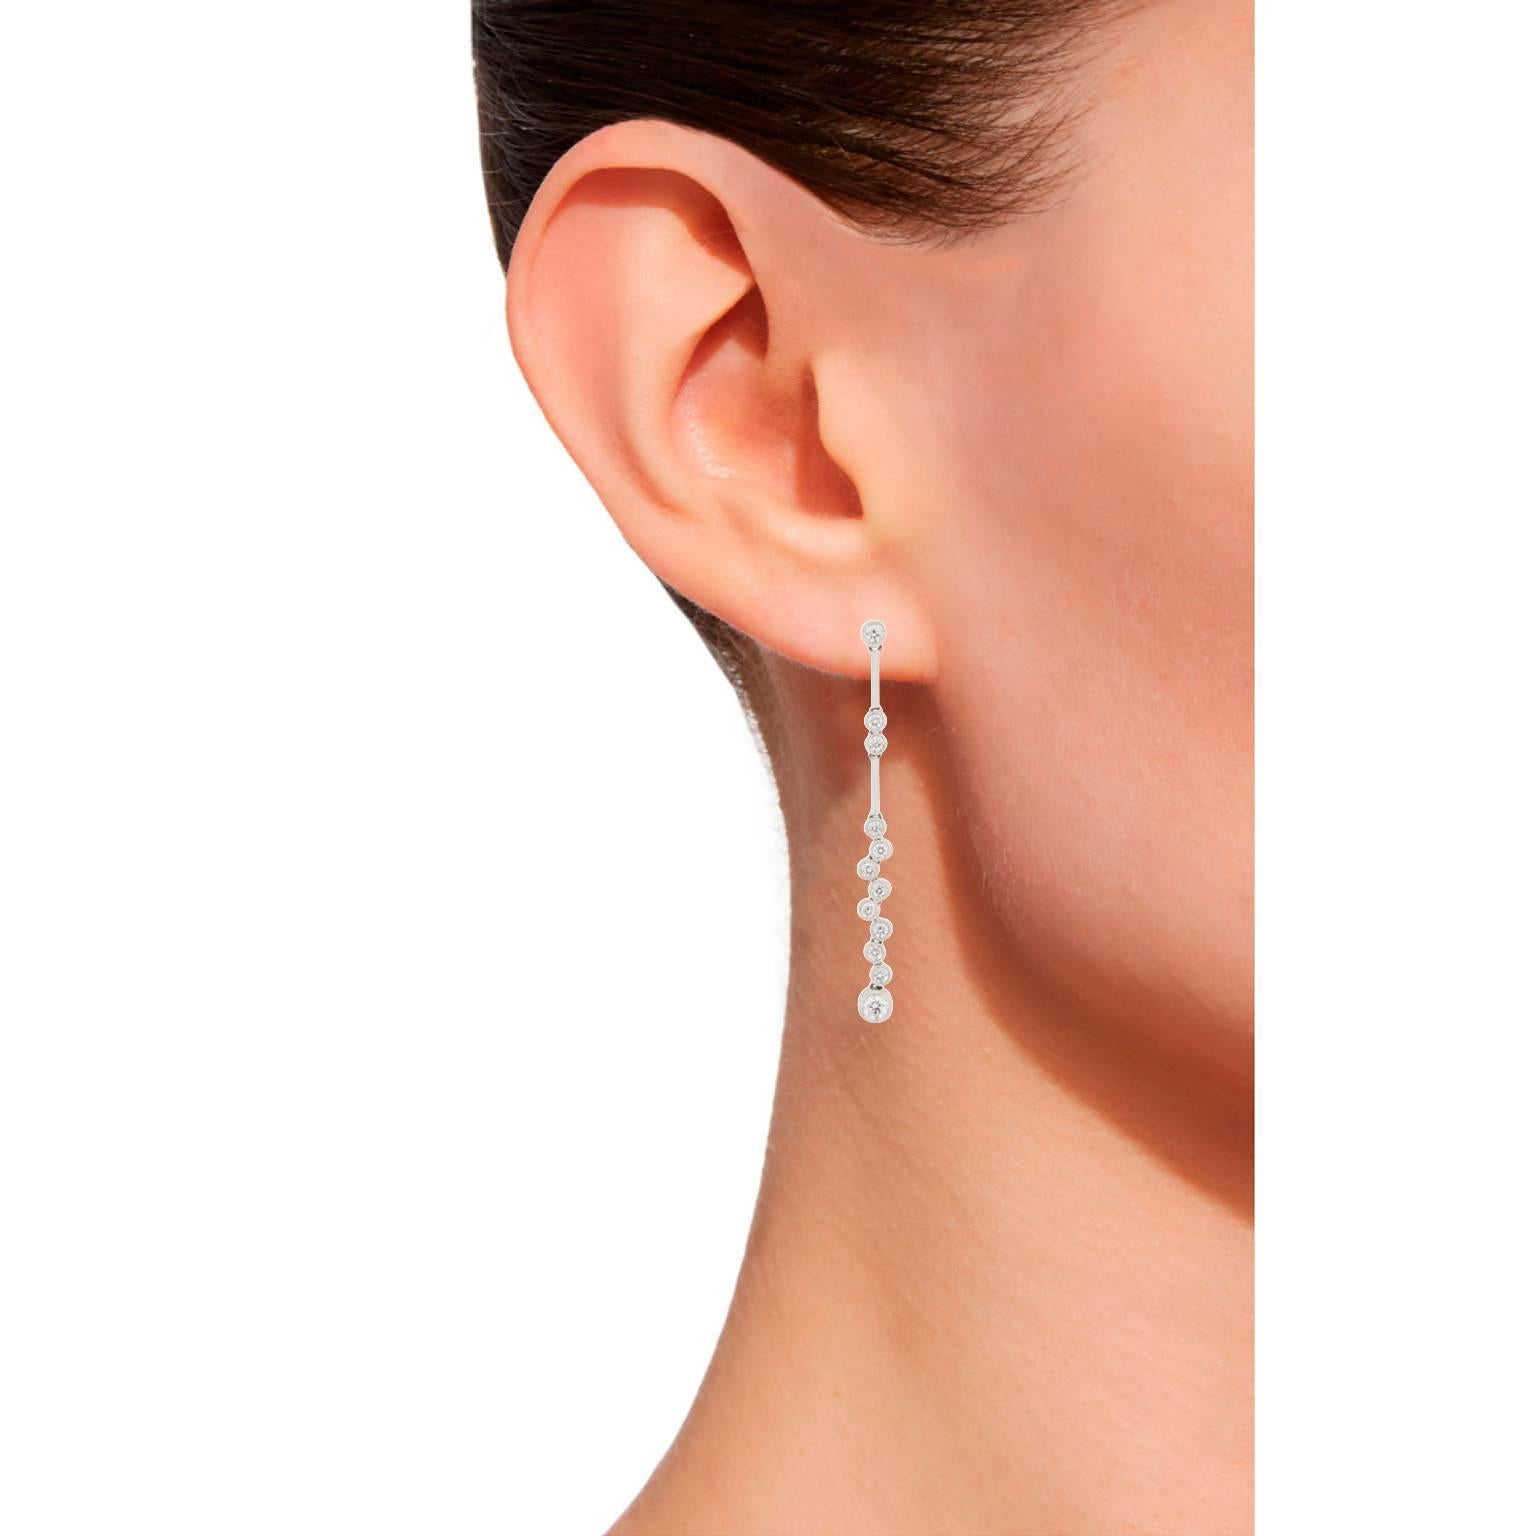 Jona design collection, hand crafted in Italy, 18K white gold bubbles dangle drop earrings set with 24 round cut white diamonds, F color, VVS1 clarity, for a total weight of 1.07 carats. Length 2 inch/52mm. White gold: gr. 5.86 White diamonds ct.